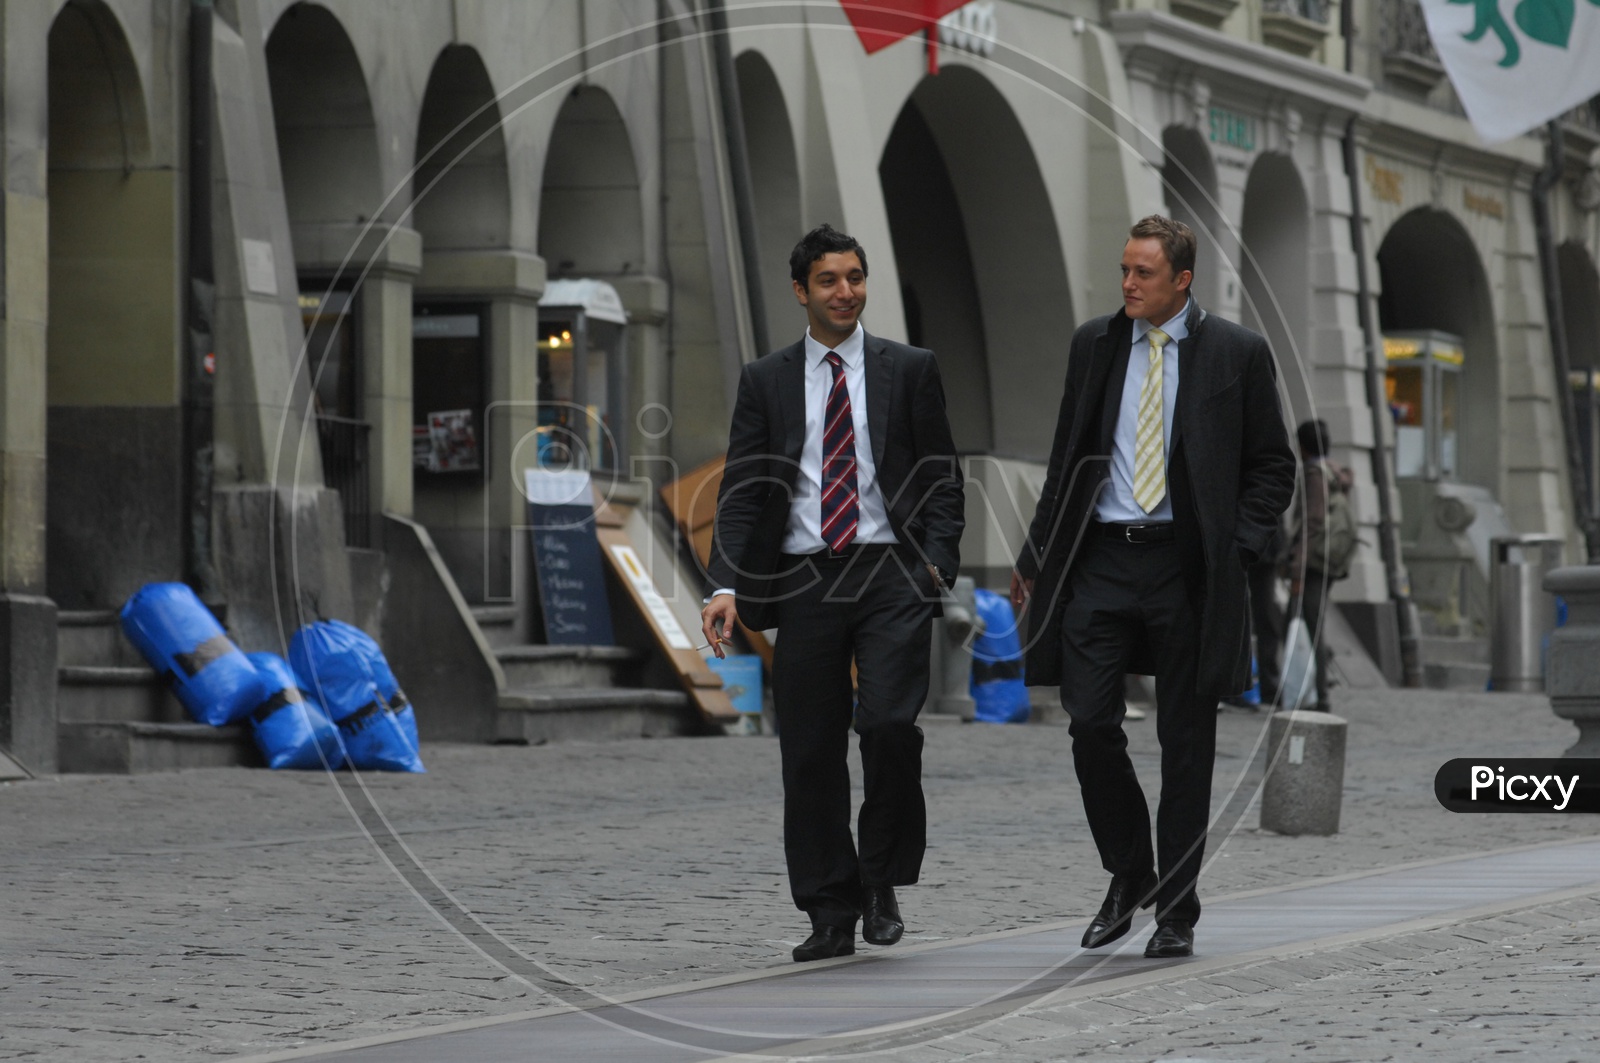 Man Wearing Suits On Switzerland Streets